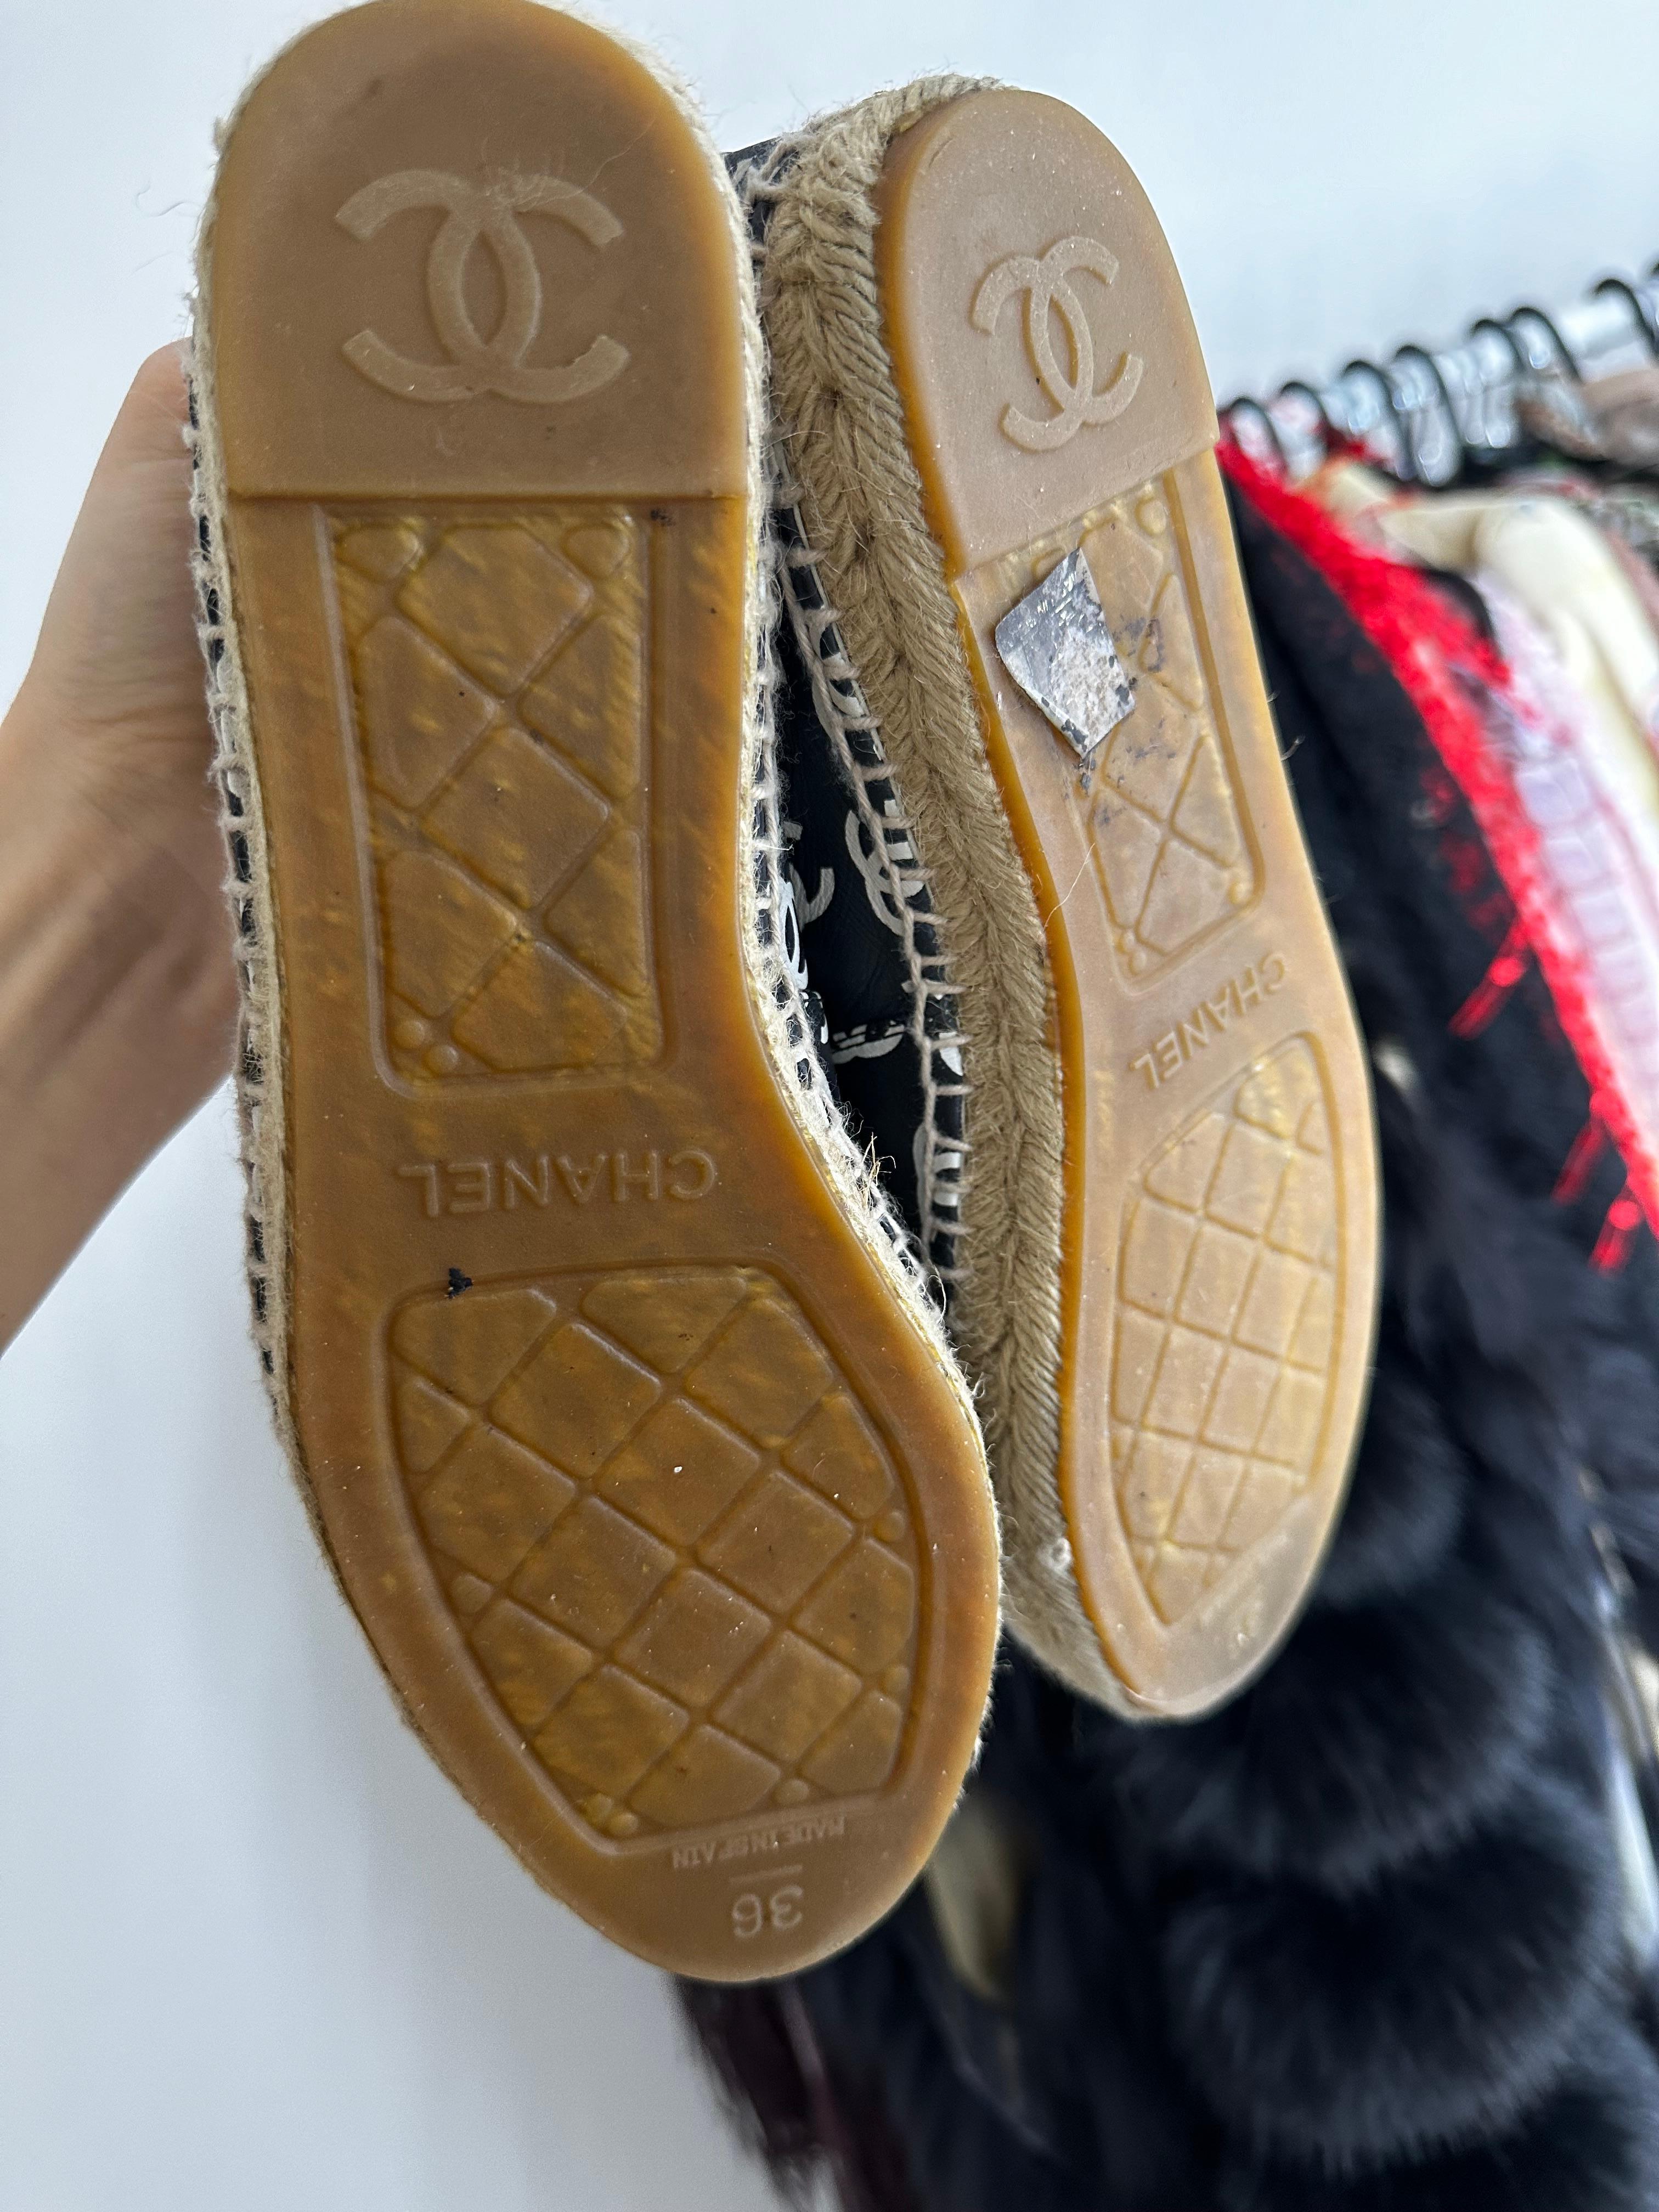 Chanel CC logo black and white lambskin espadrilles 
Comes with original box and dust bags 
Worn 3x, some wear/rubbing on the interior. Light mark on the exterior. Overall good condition 
Size 36